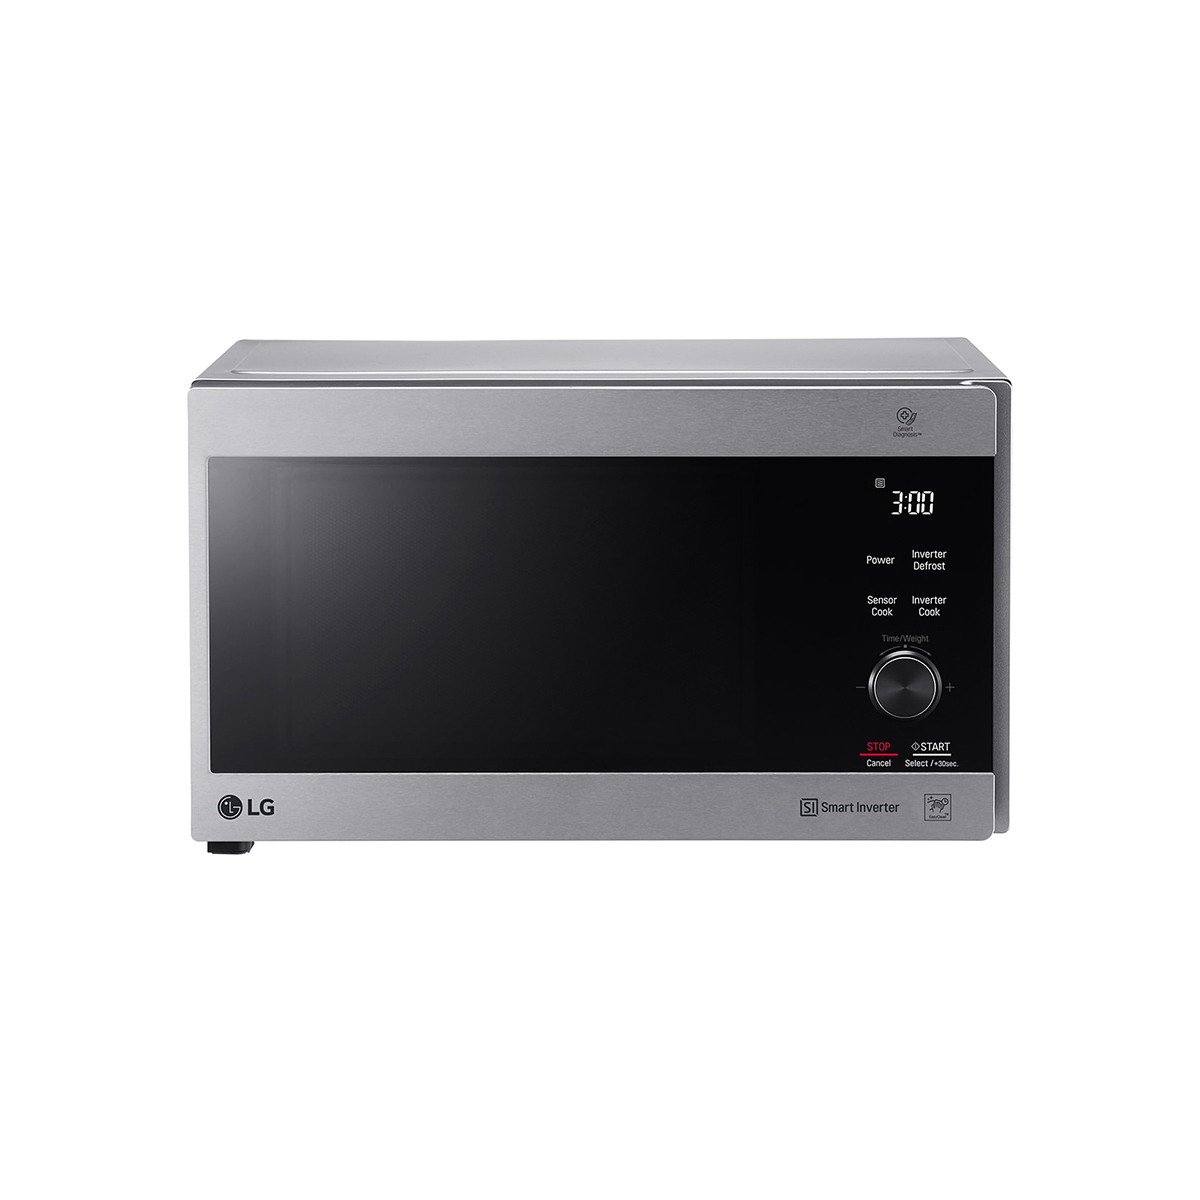 What is a Grill Microwave Oven & How to Select it?